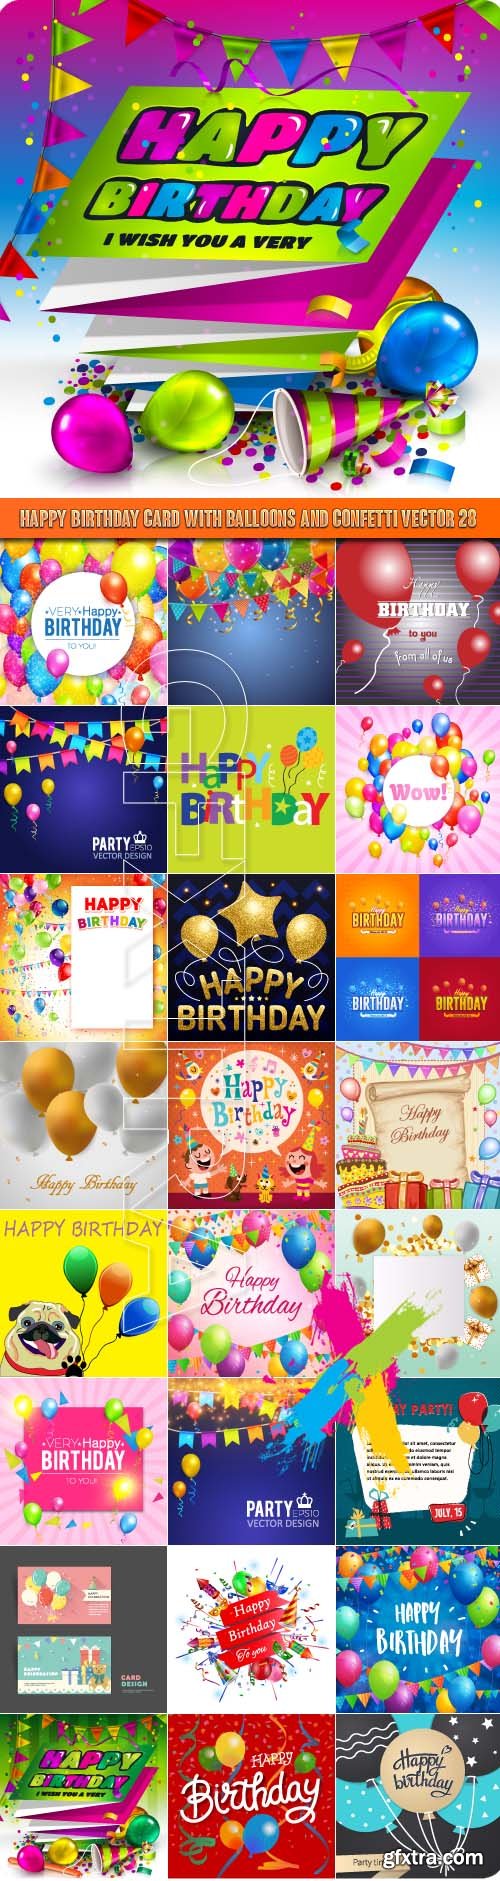 Happy Birthday cards with balloons and confetti vector 28